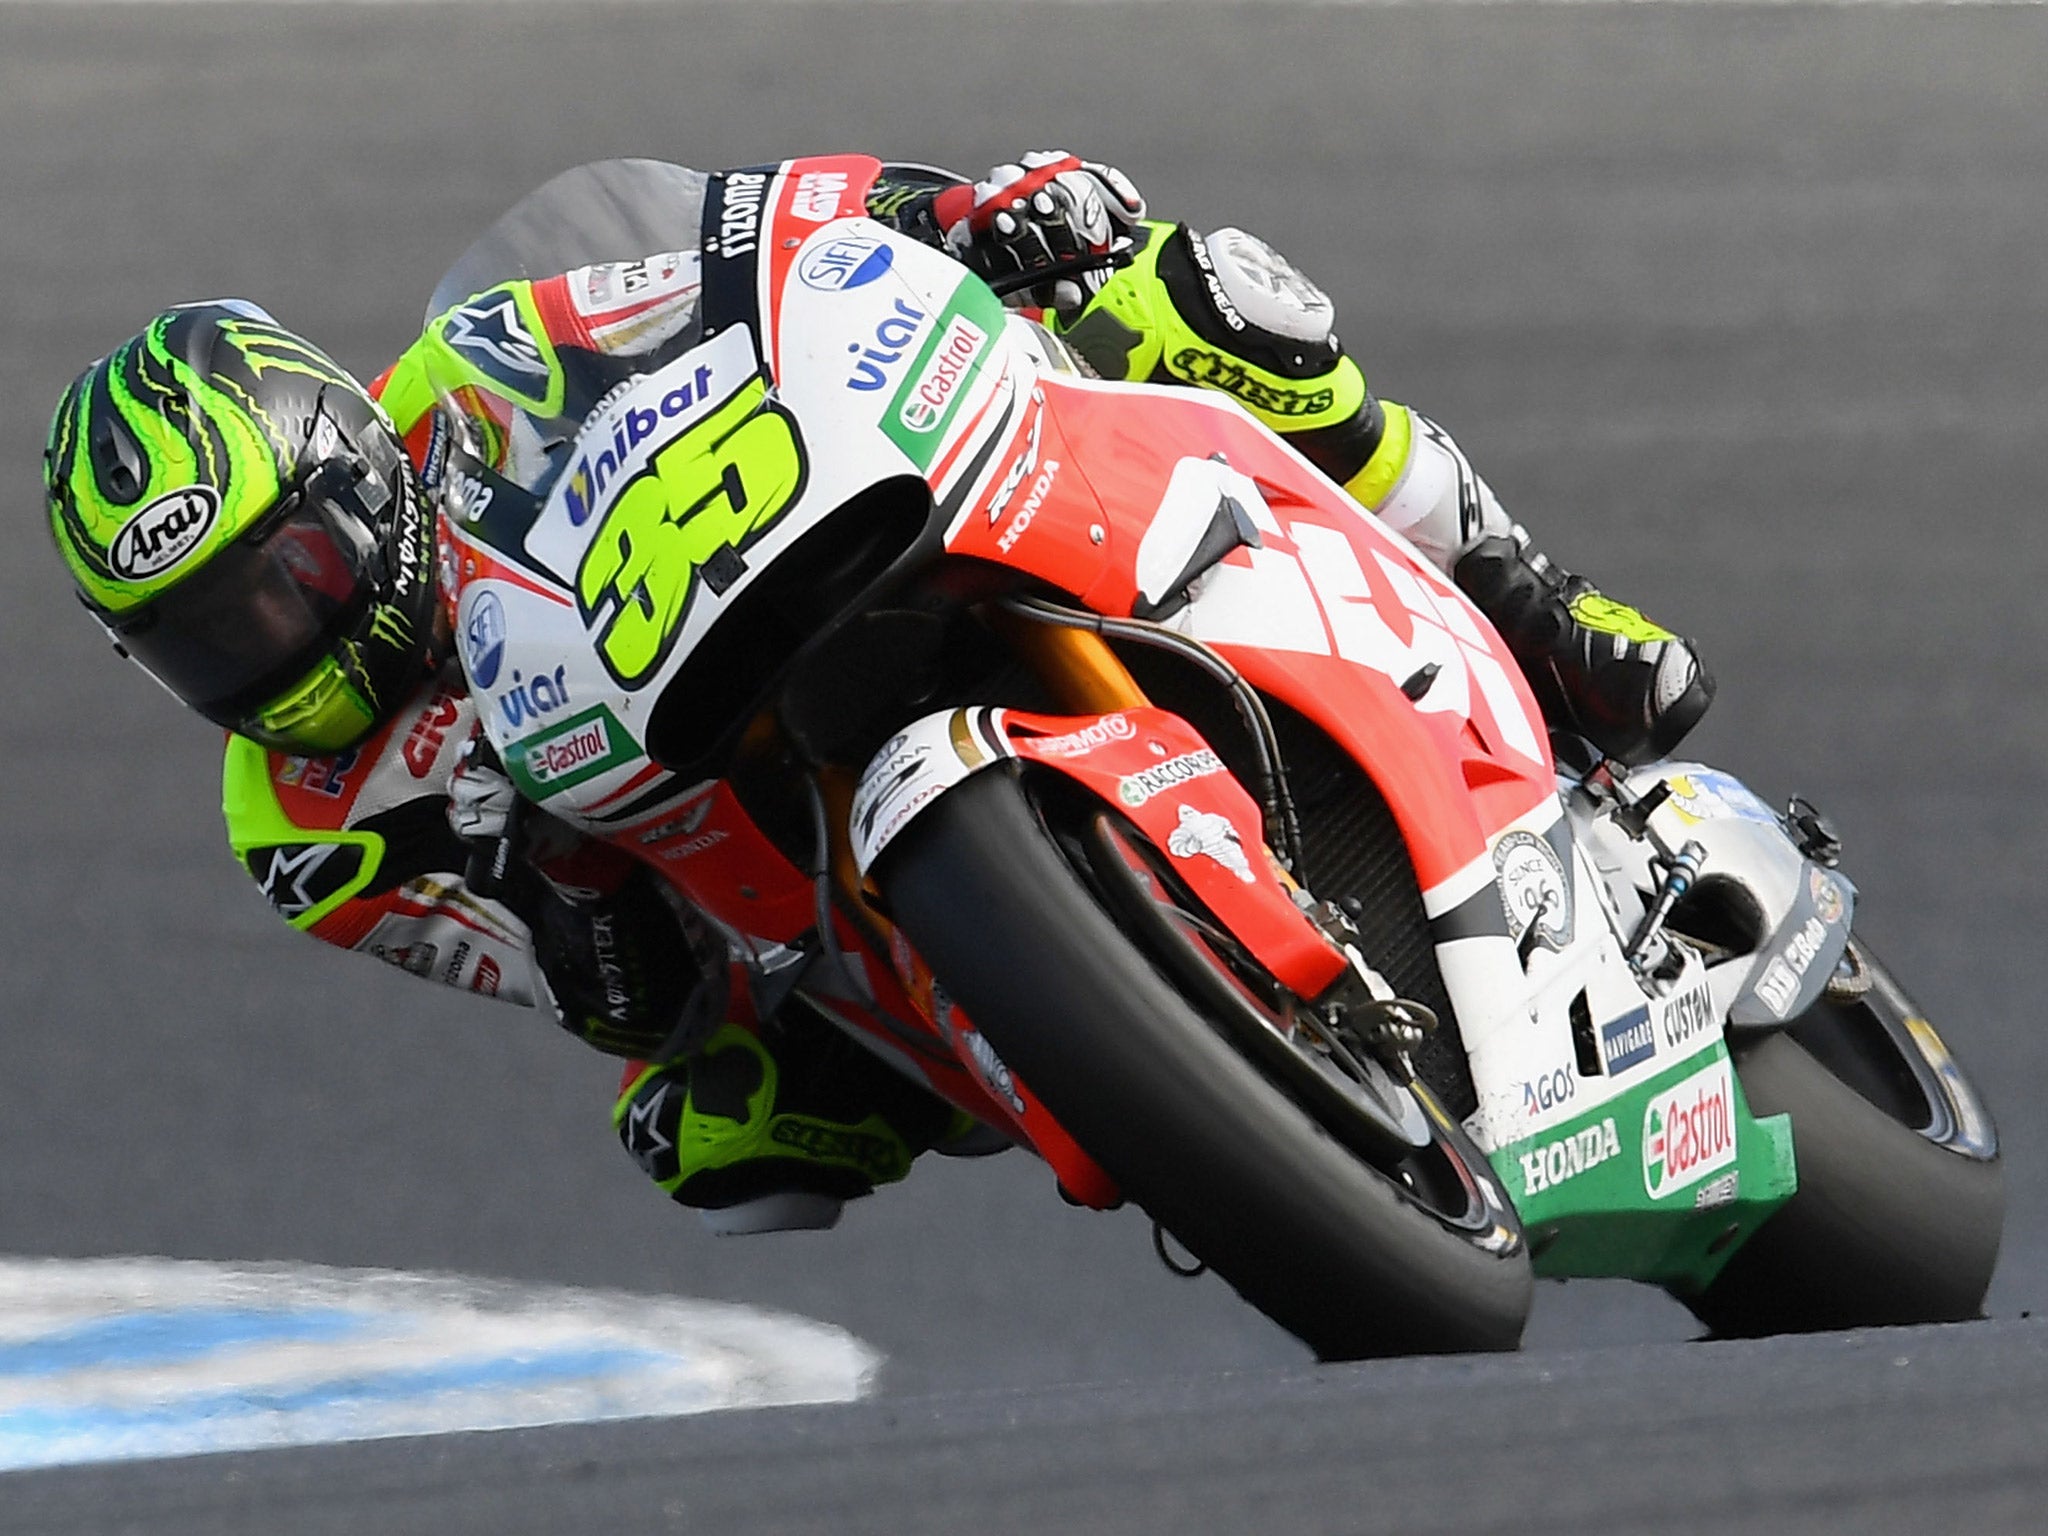 Crutchlow took the lead when Marquez crashed out on lap nine